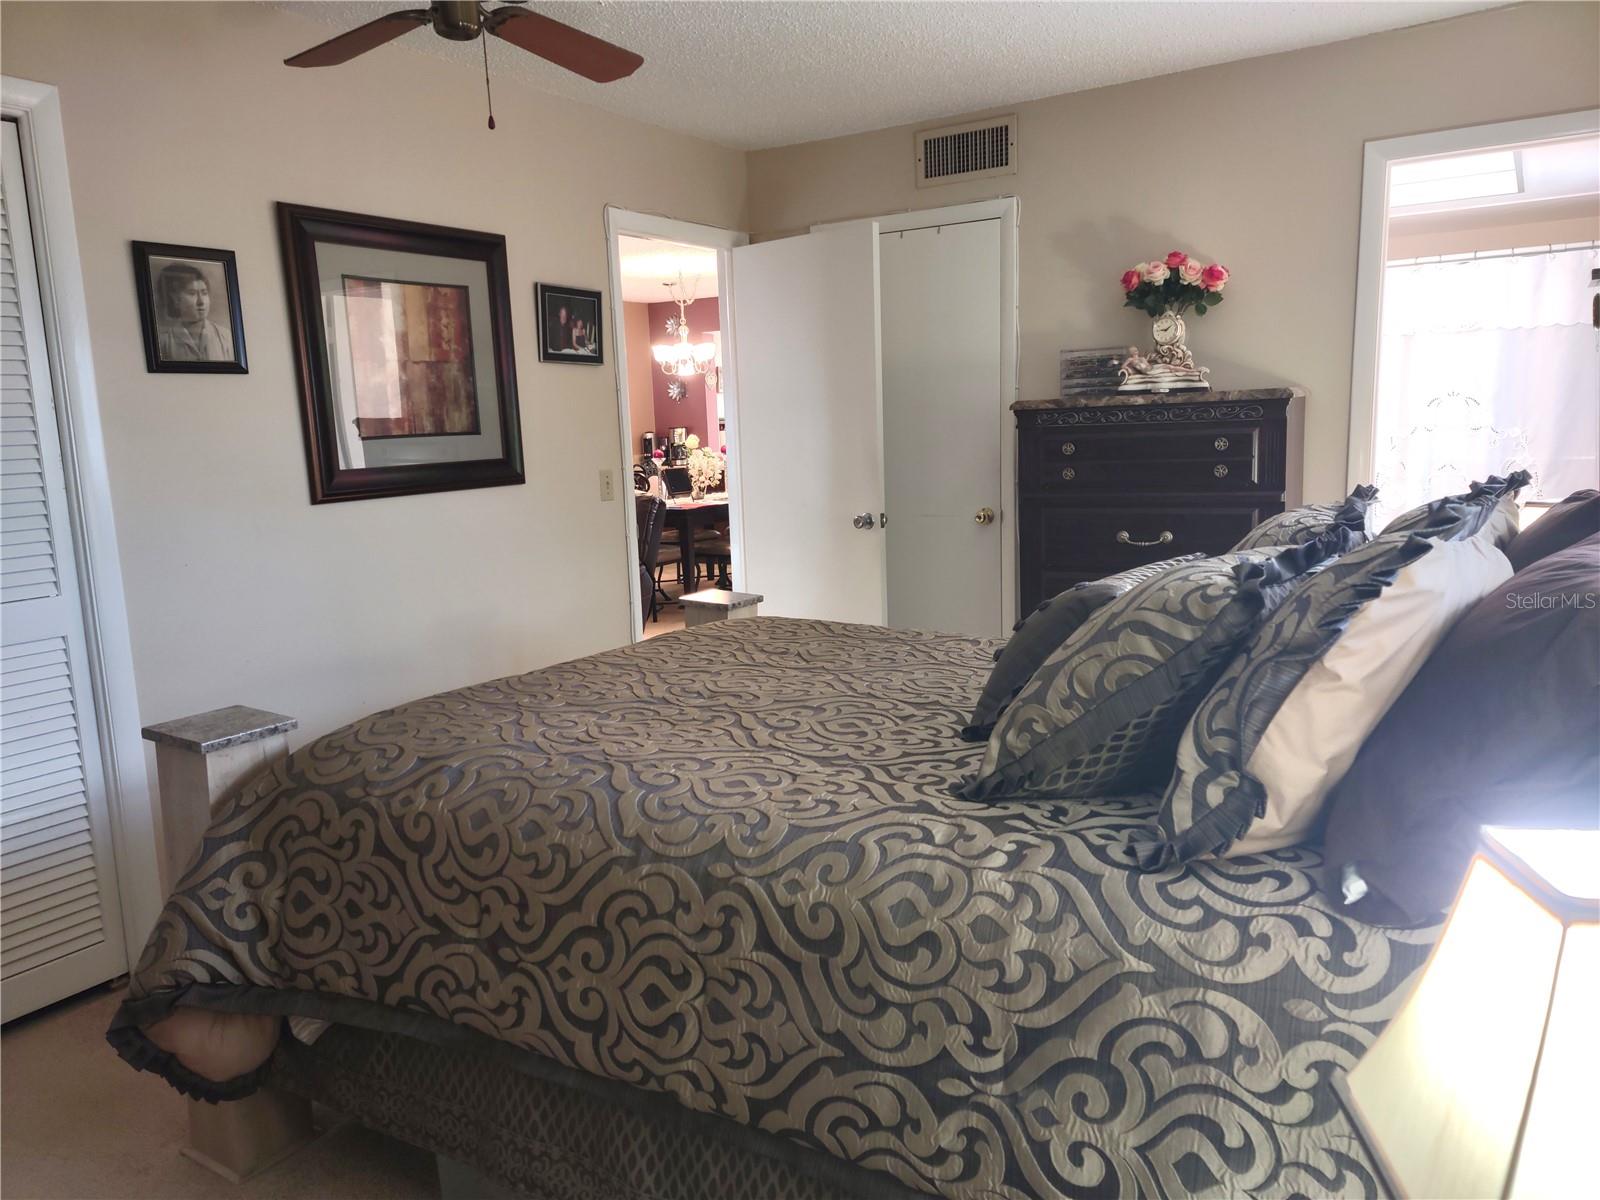 Master Bedroom offers both a wall closet on left and a walk-in closet behind entrance door